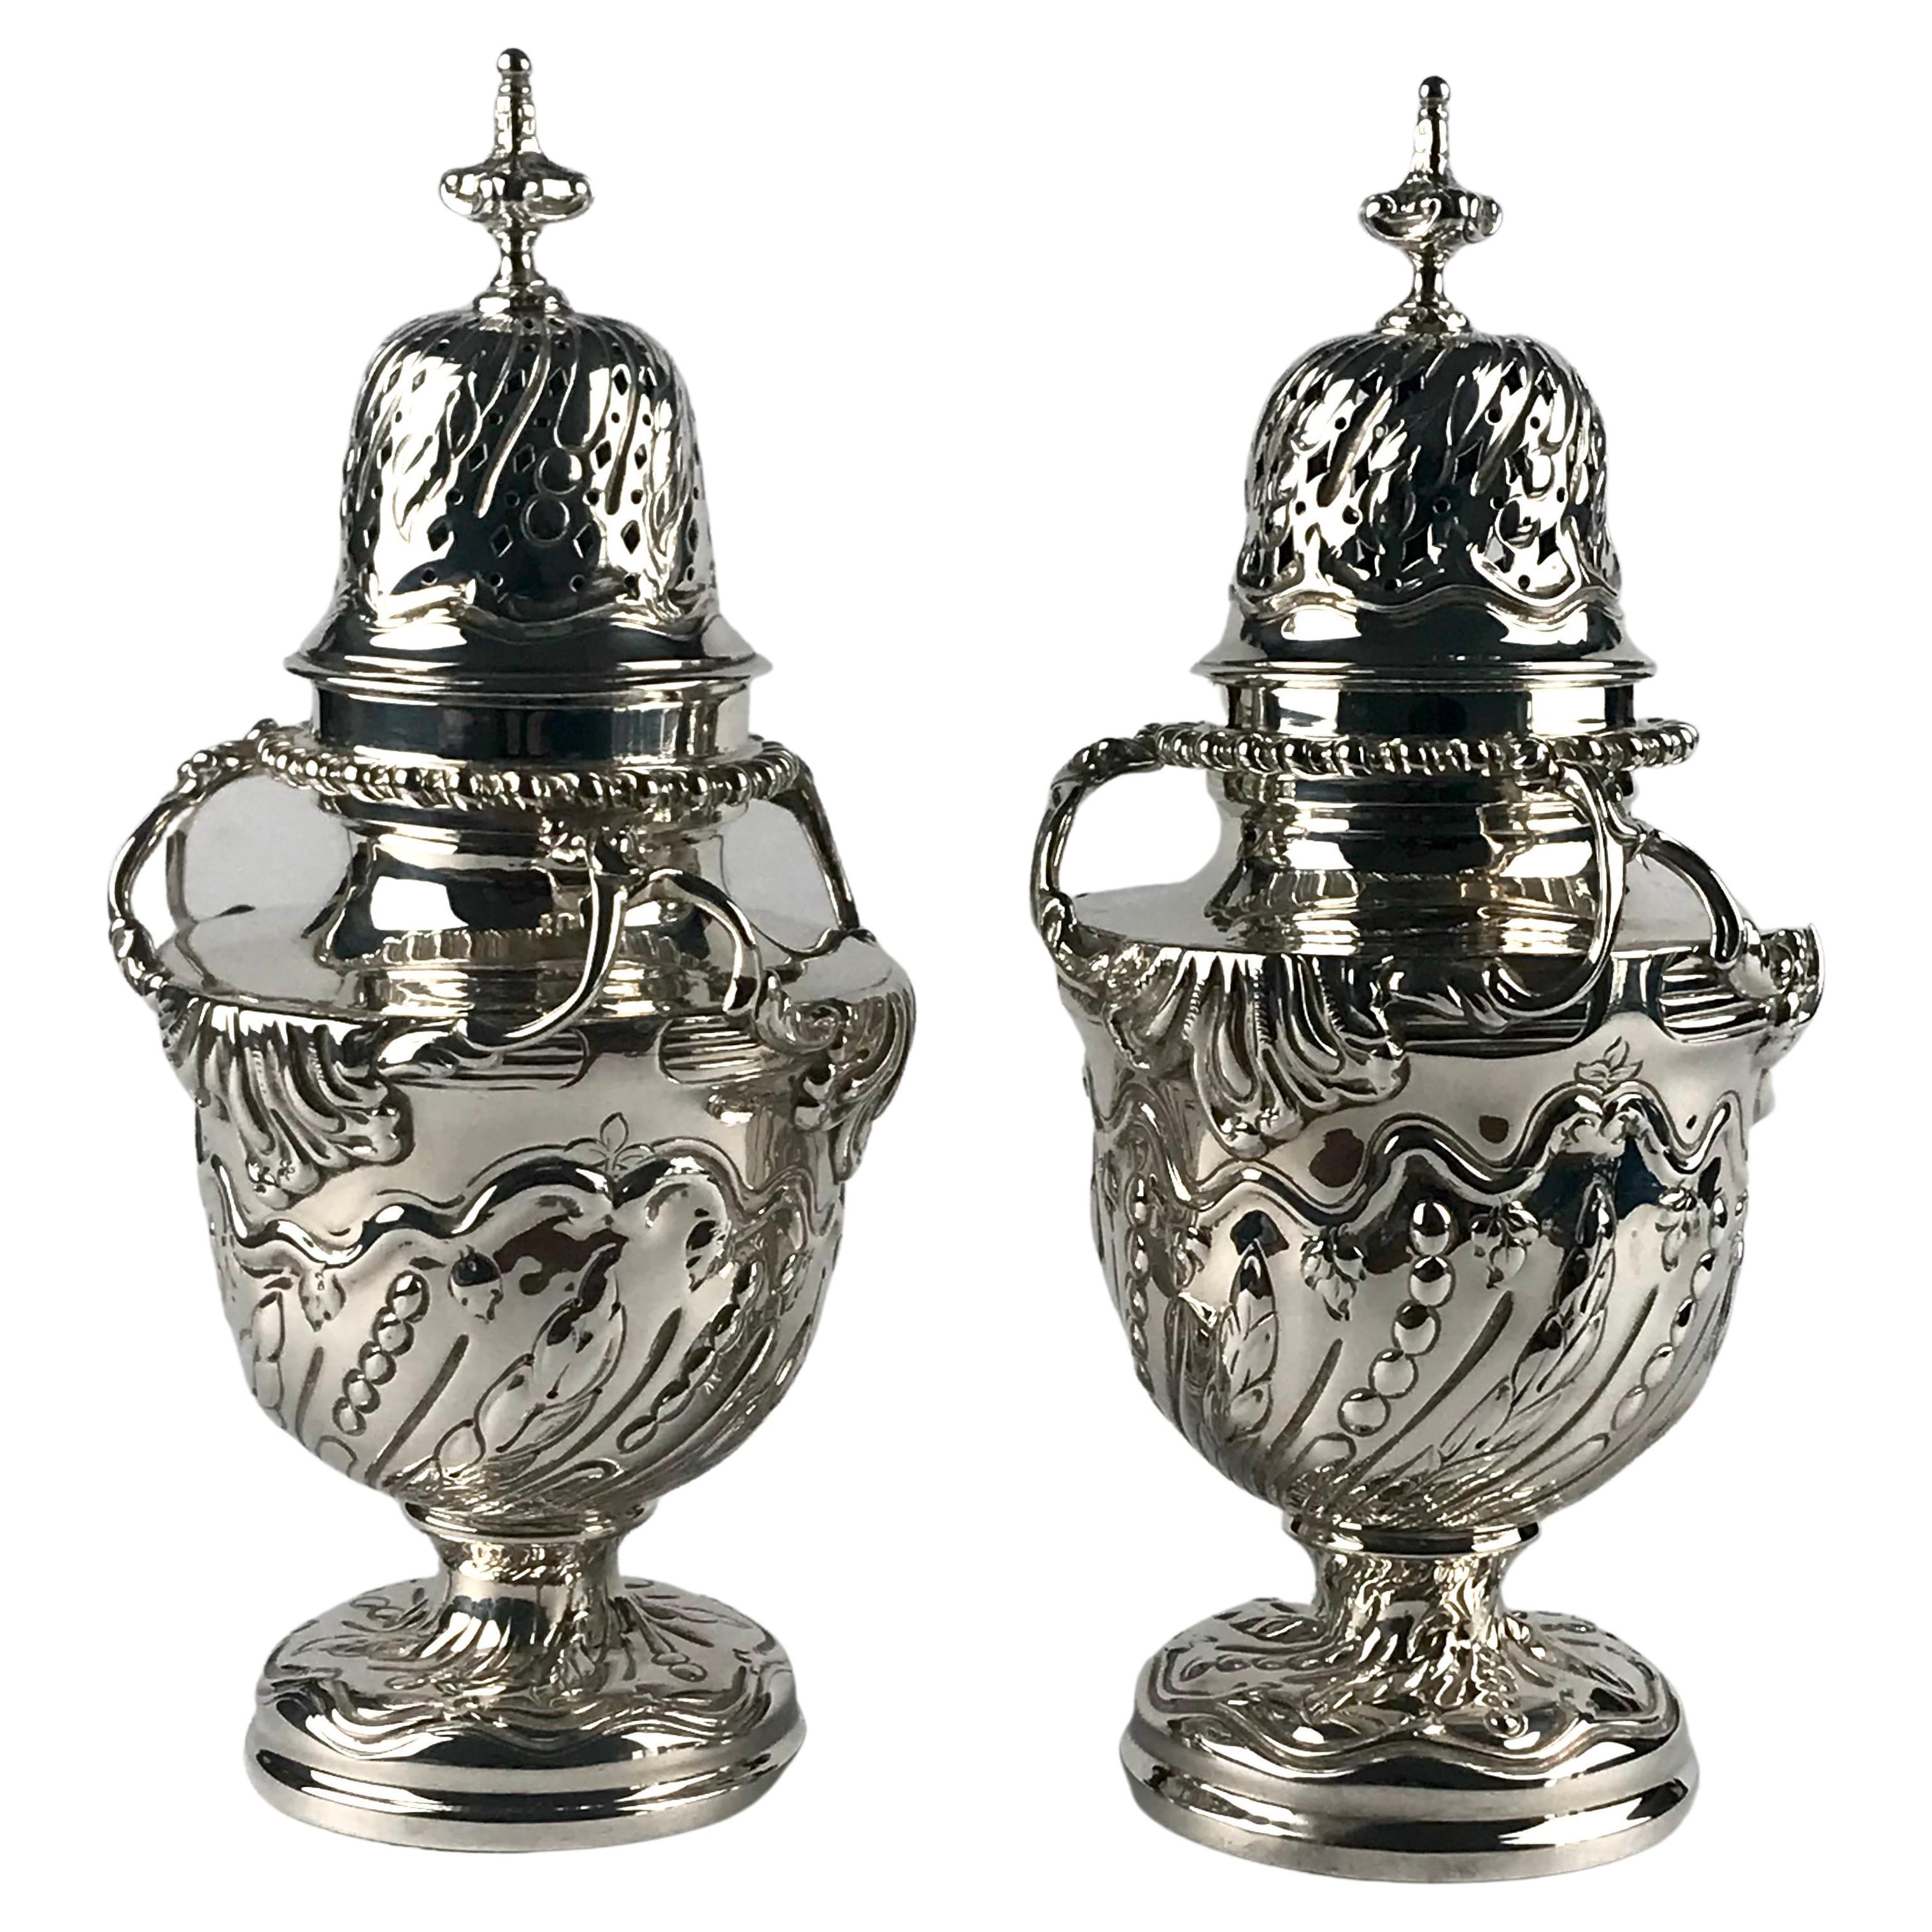 Magnificent Solid Silver Sterling Victorian Pair Sugar Casters Shakers 910g